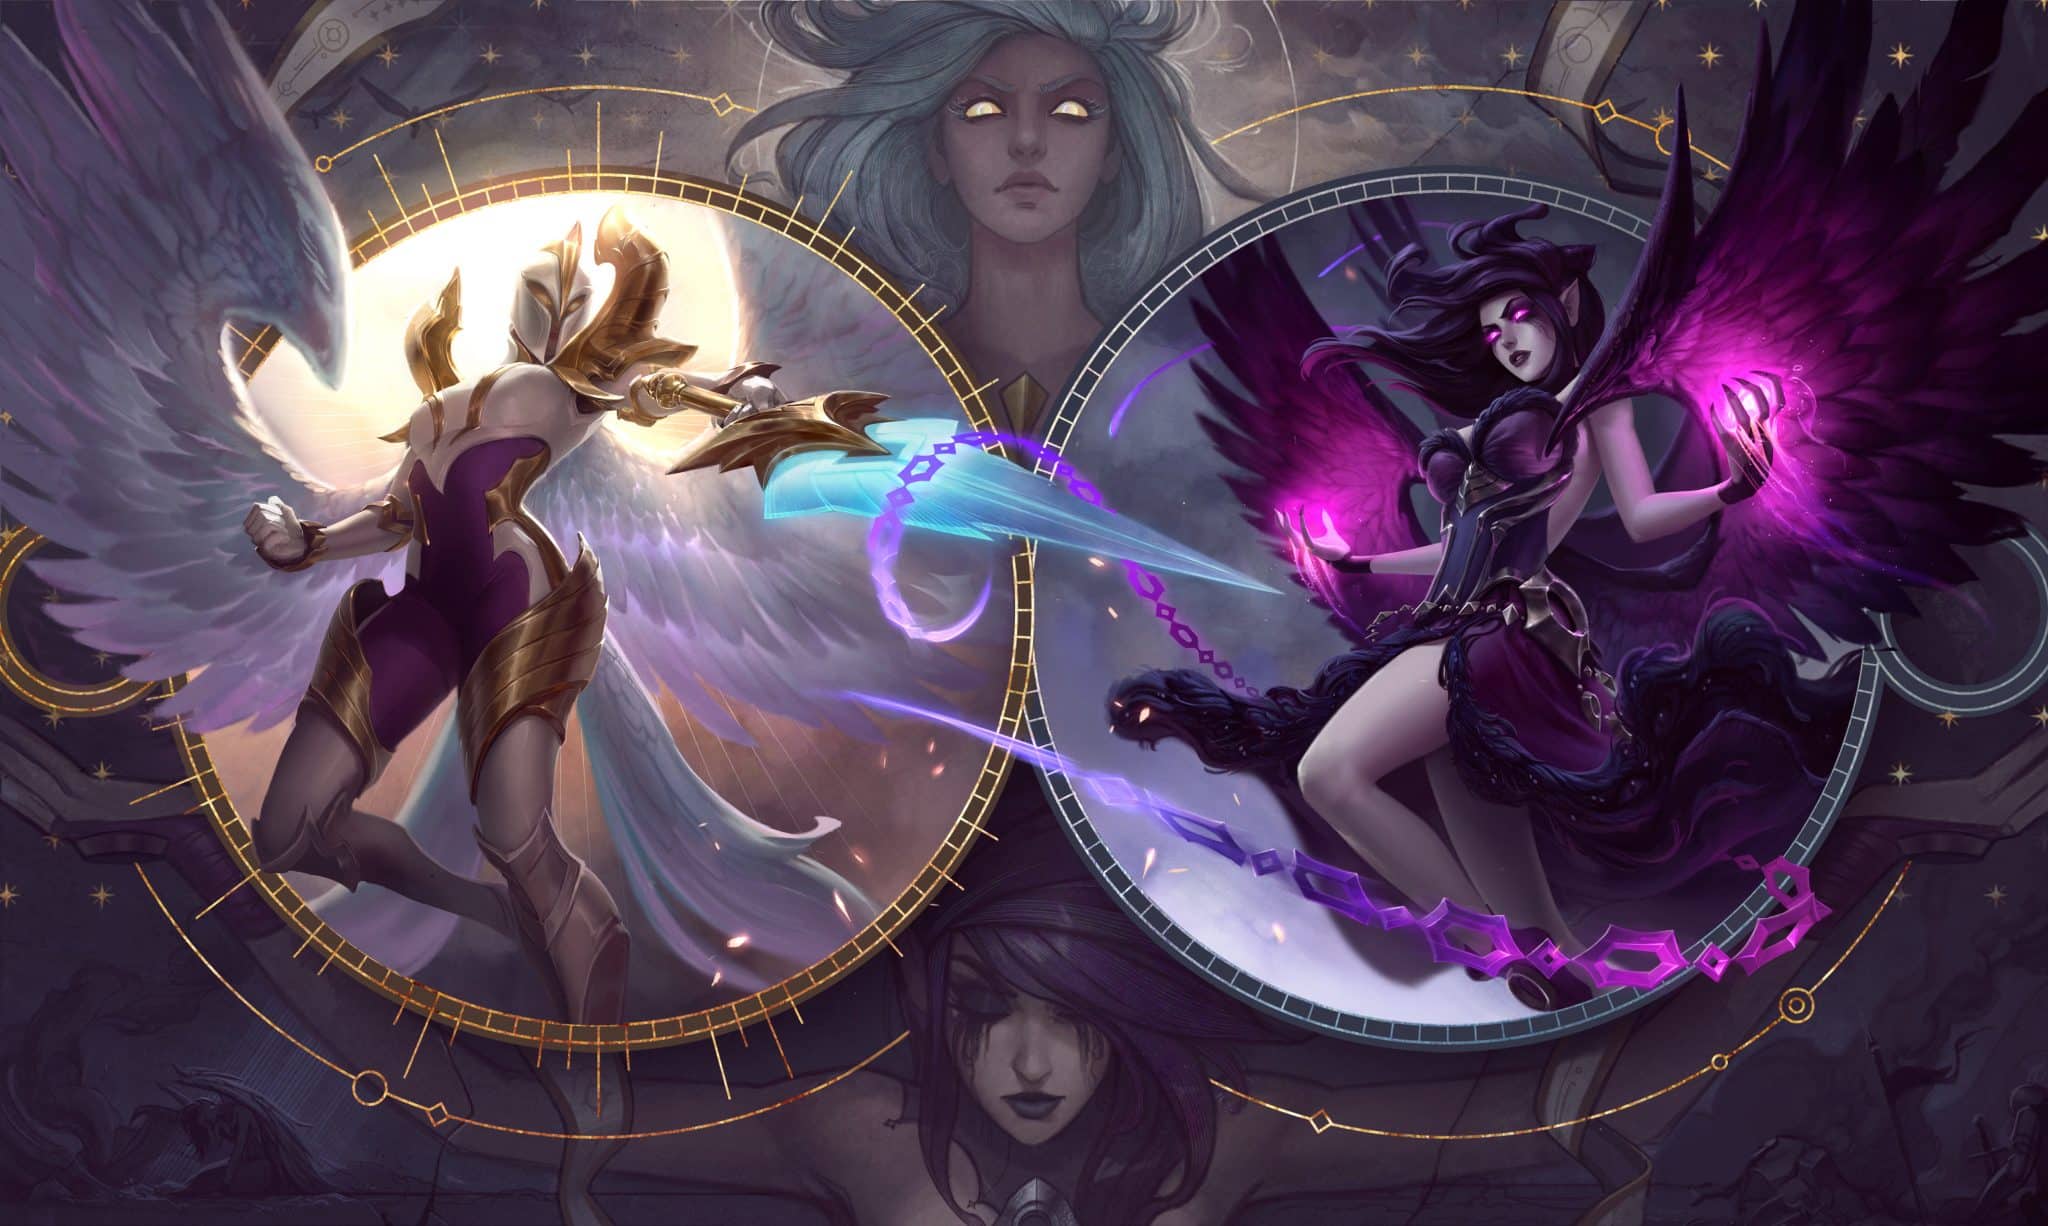 Morgana and Kayle fighting in League of Legends art